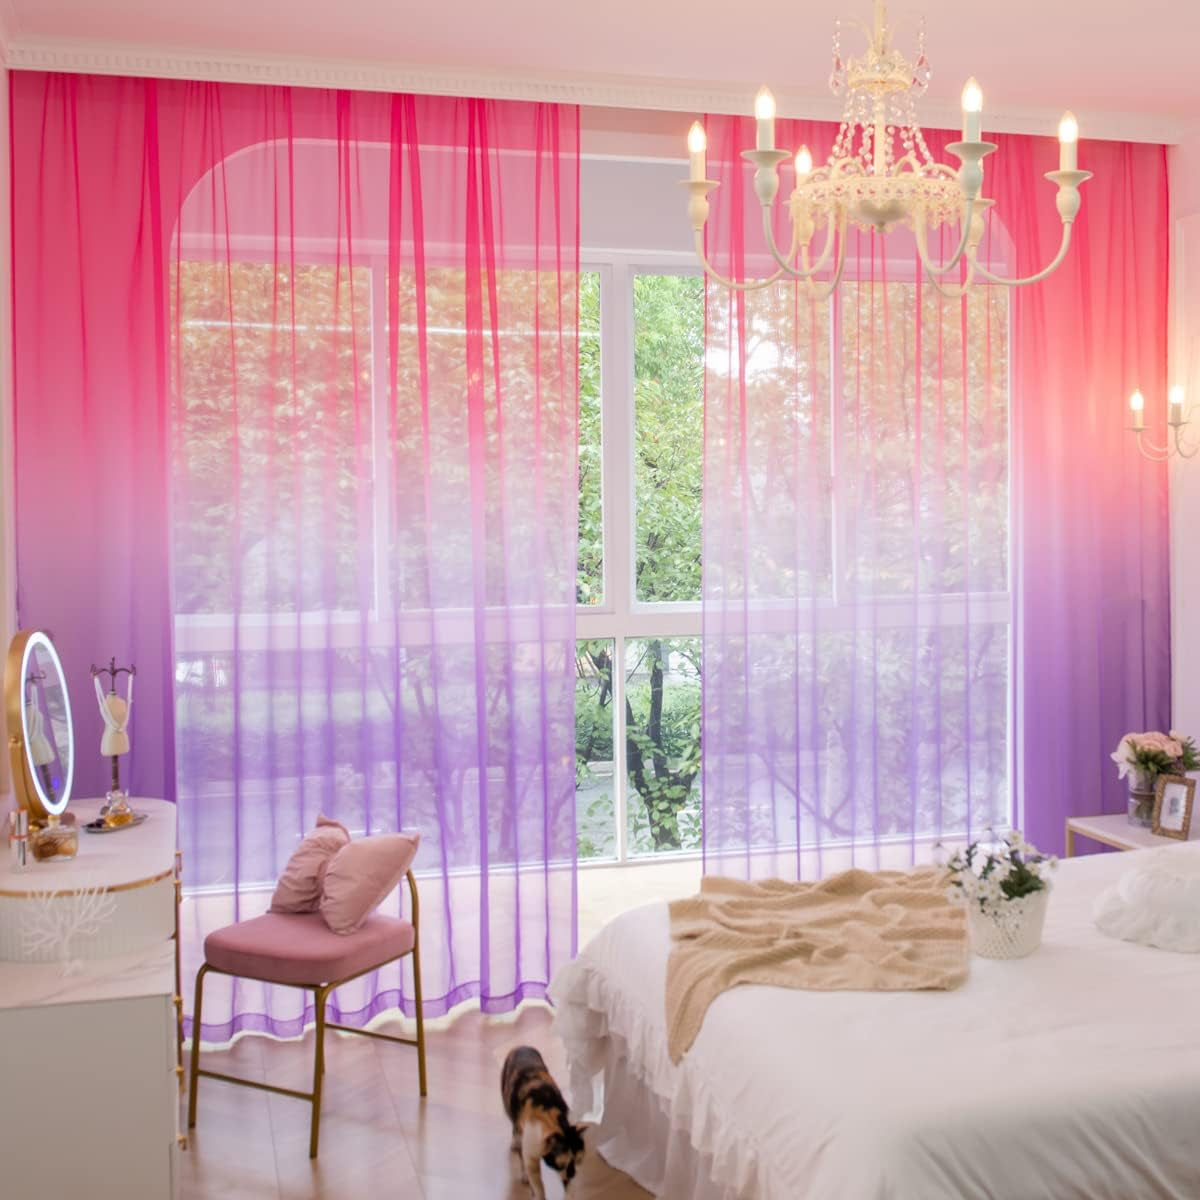 MOONVAN Windows Semi White Sheer Curtains 84 Inches Length 52 Inches Width 2 Panels Set Translucent Sheer Curtain Basic Rod Pocket for Bedroom Children Living Room Yard Kitchen  MOONVAN Gradient-Red-Purple 52''W X 84''L 